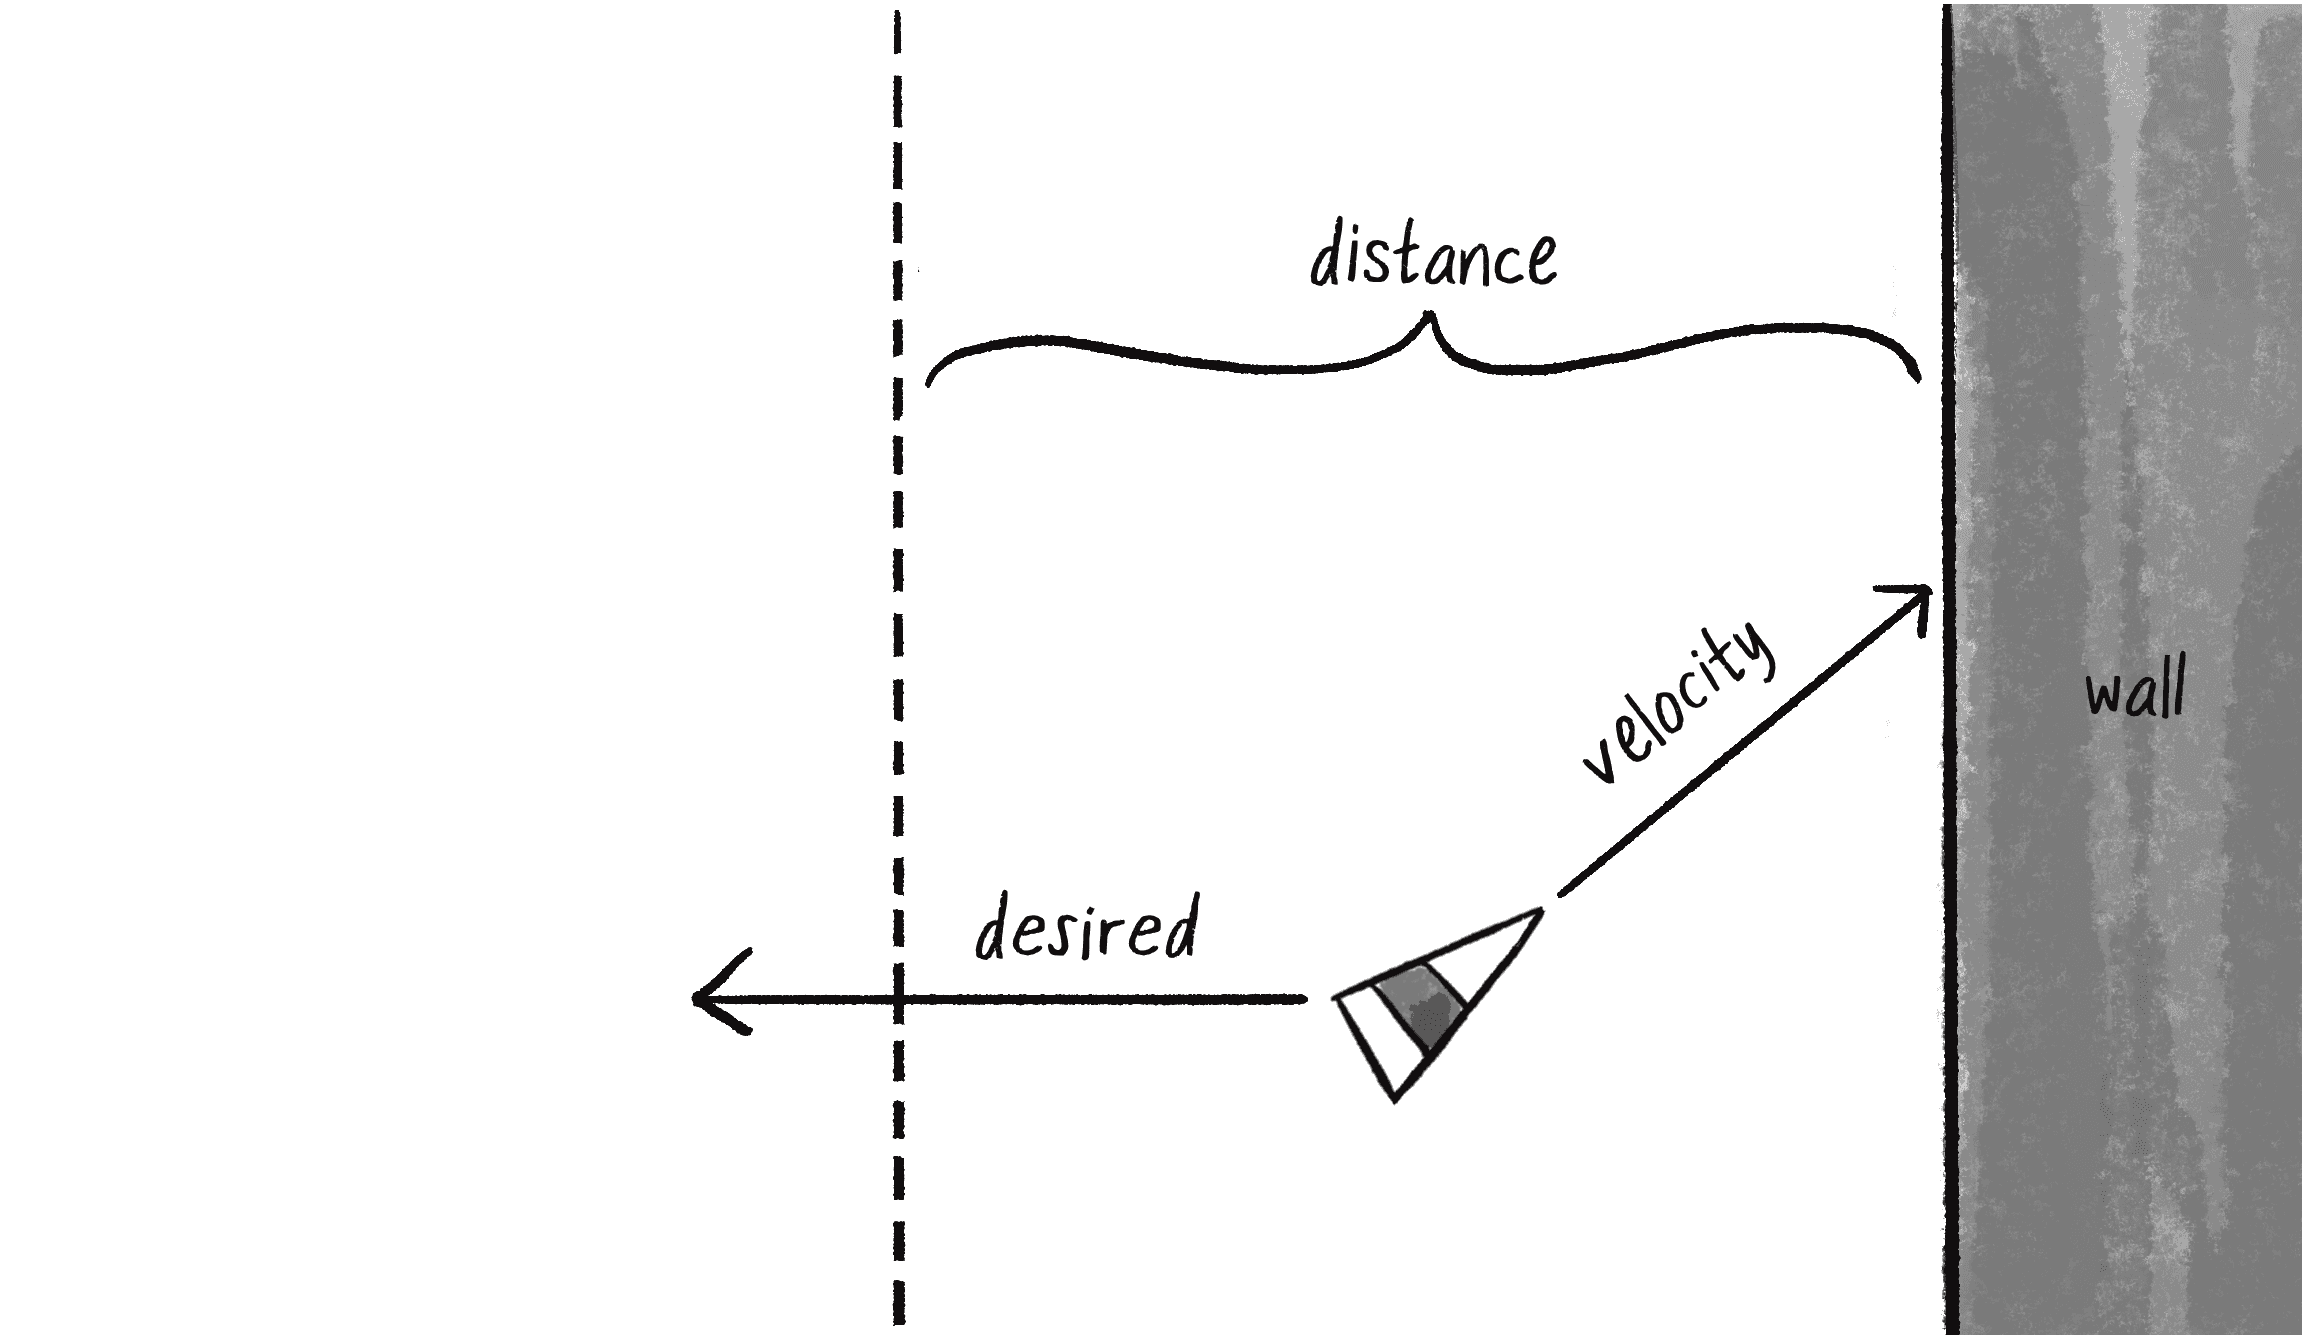 Figure 5.12: The desired velocity points away from the wall if the vehicle gets too close.